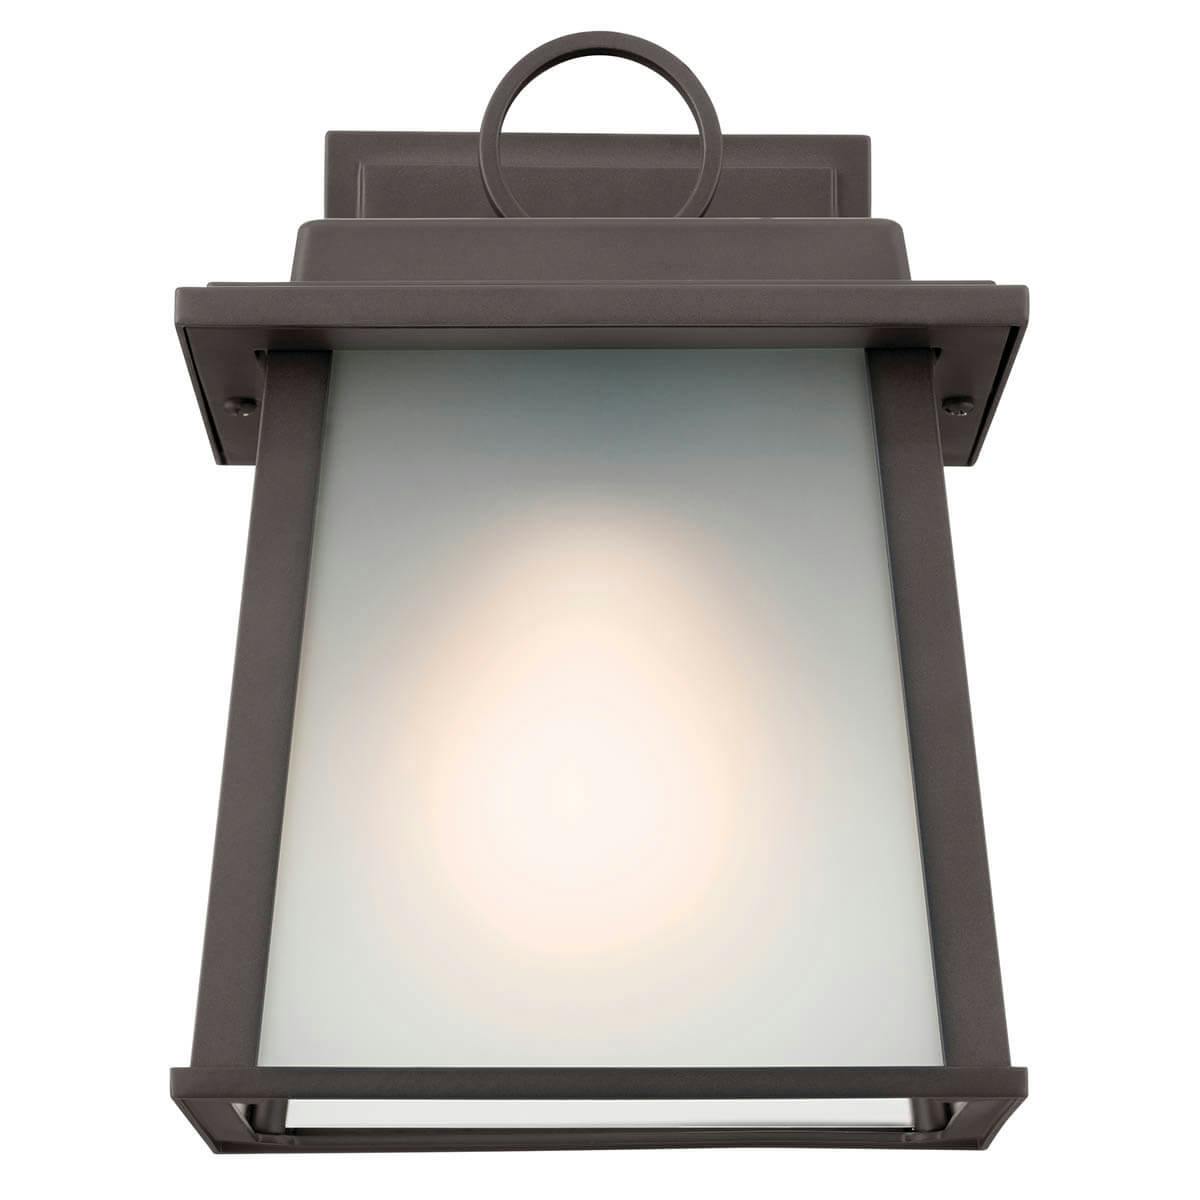 Front view of the Noward 9" 1 Light Wall Light Olde Bronze® on a white background